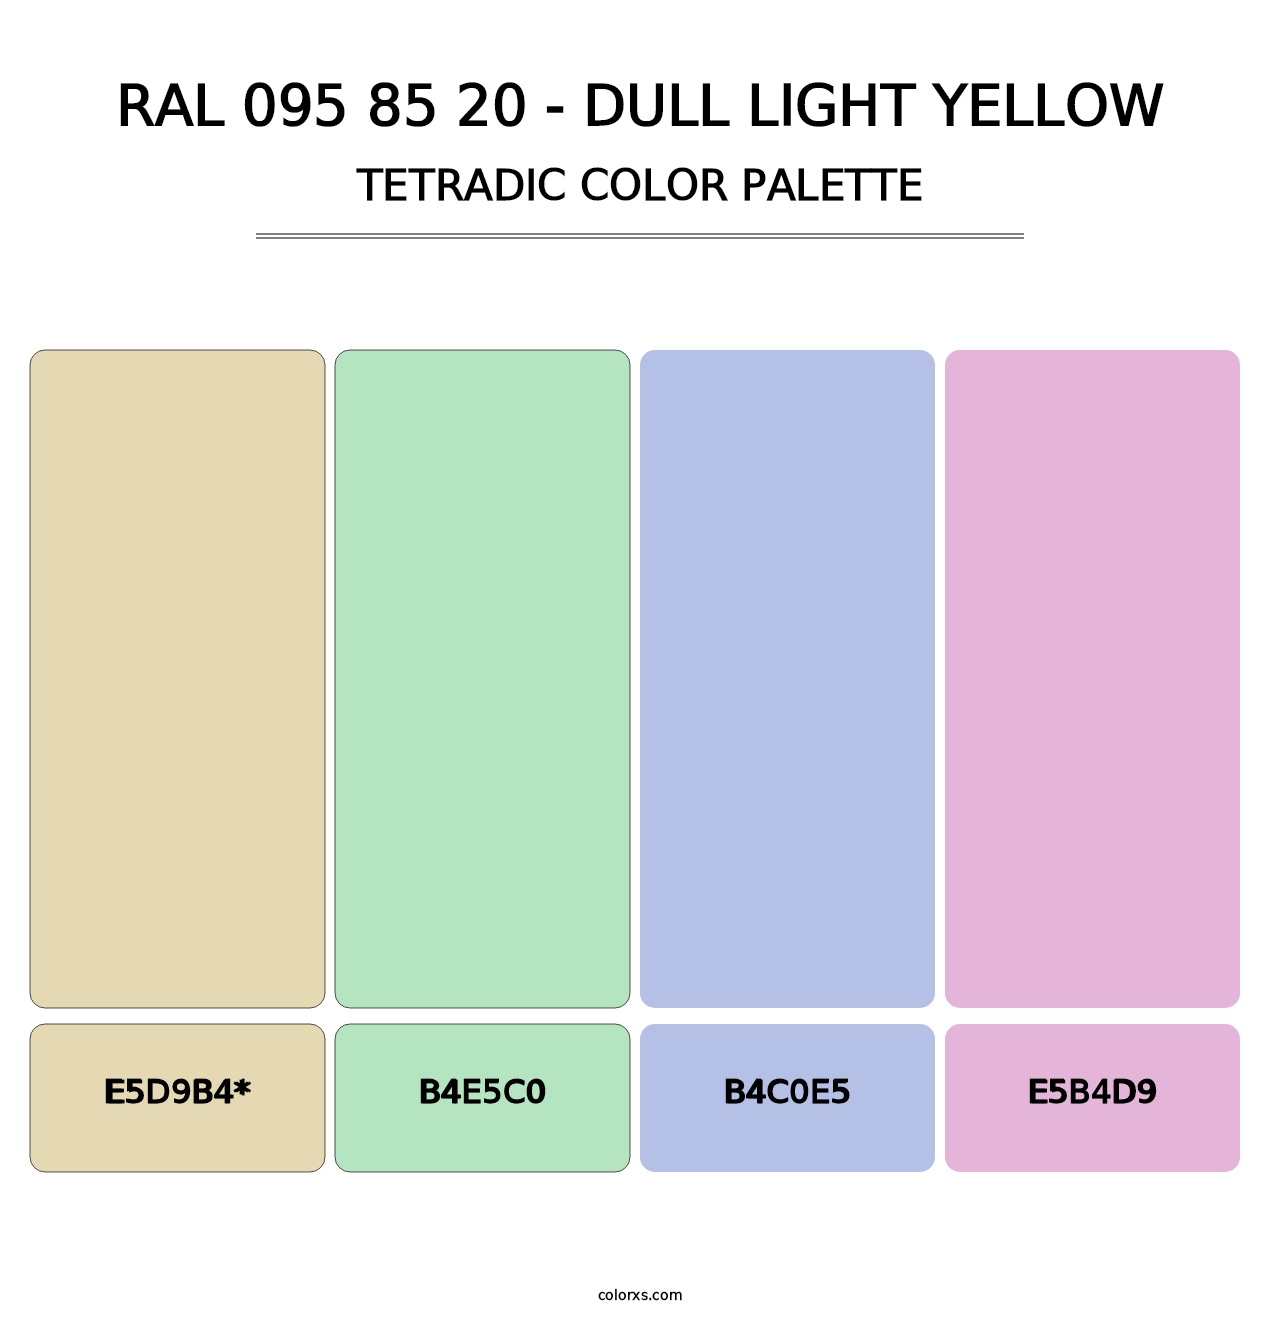 RAL 095 85 20 - Dull Light Yellow - Tetradic Color Palette